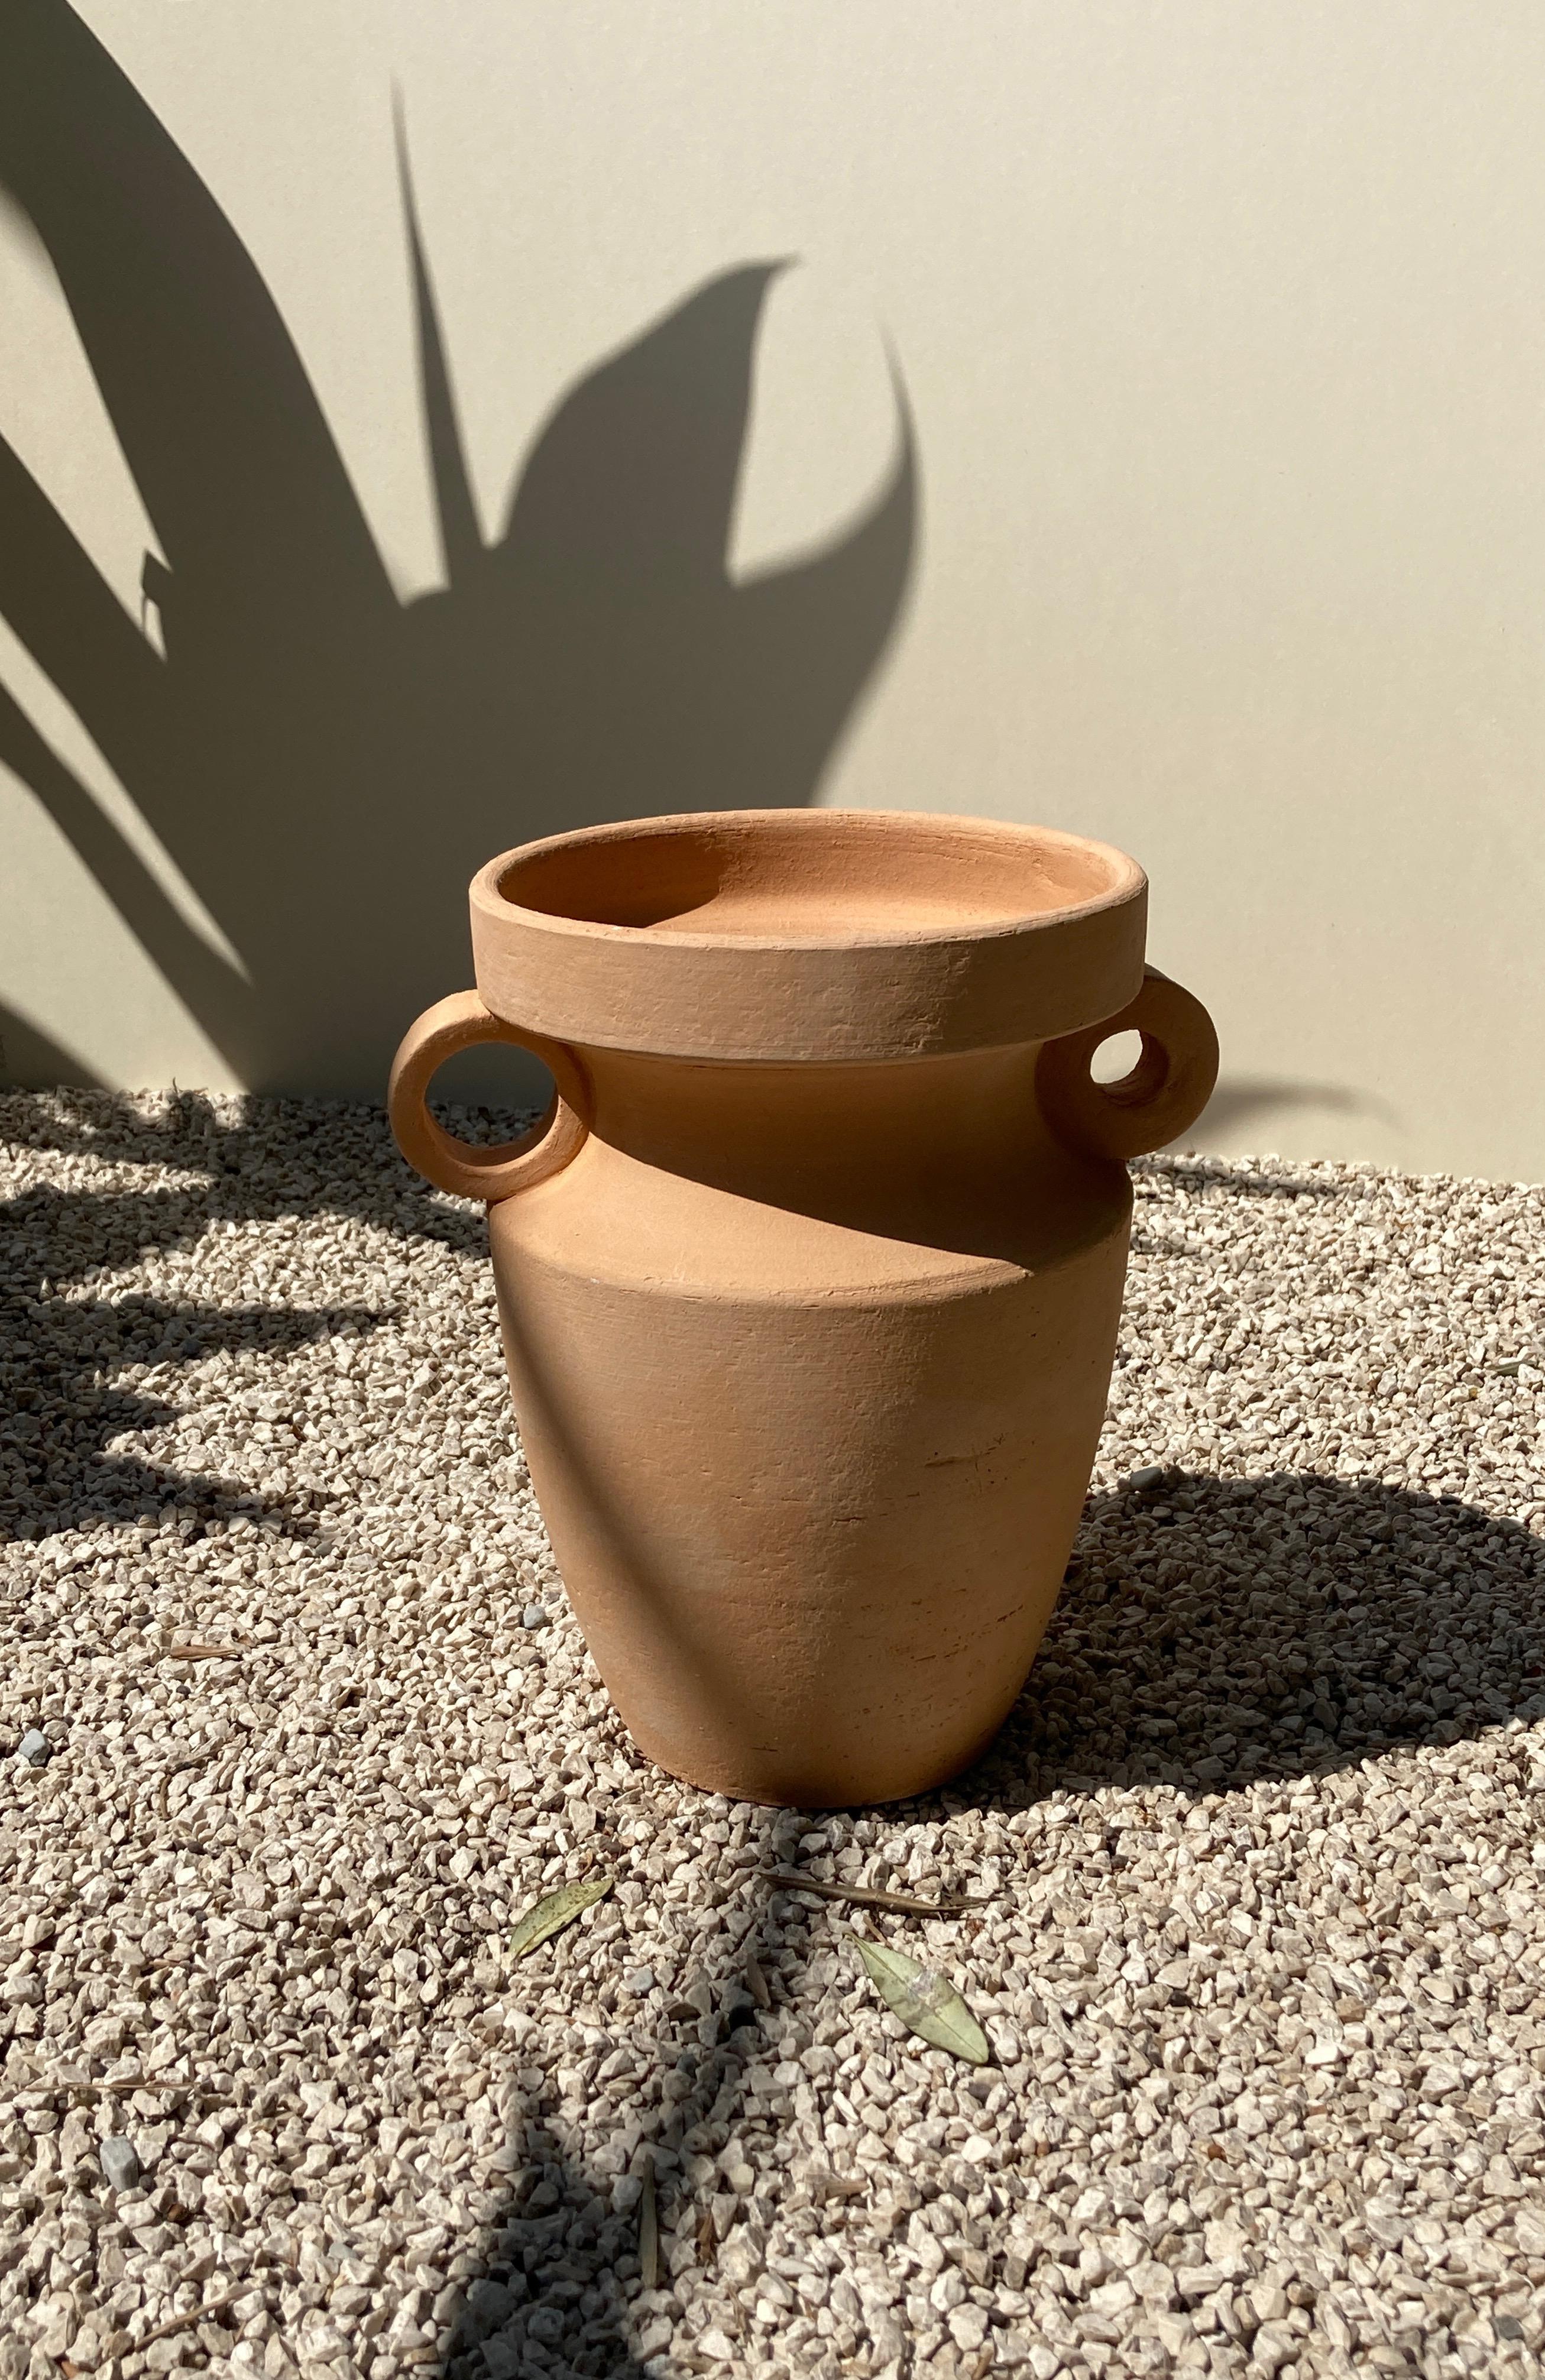 Large Terracotta Les Inseparables Whole Flower vase by Lea Ginac
Limited Edition of 3. 
Dimensions: Diameter 45 x H 52 cm 
Materials: Chamotte earth in white or terracotta
Technique: Hand-modeling.
Available in two colors, terra cotta, and